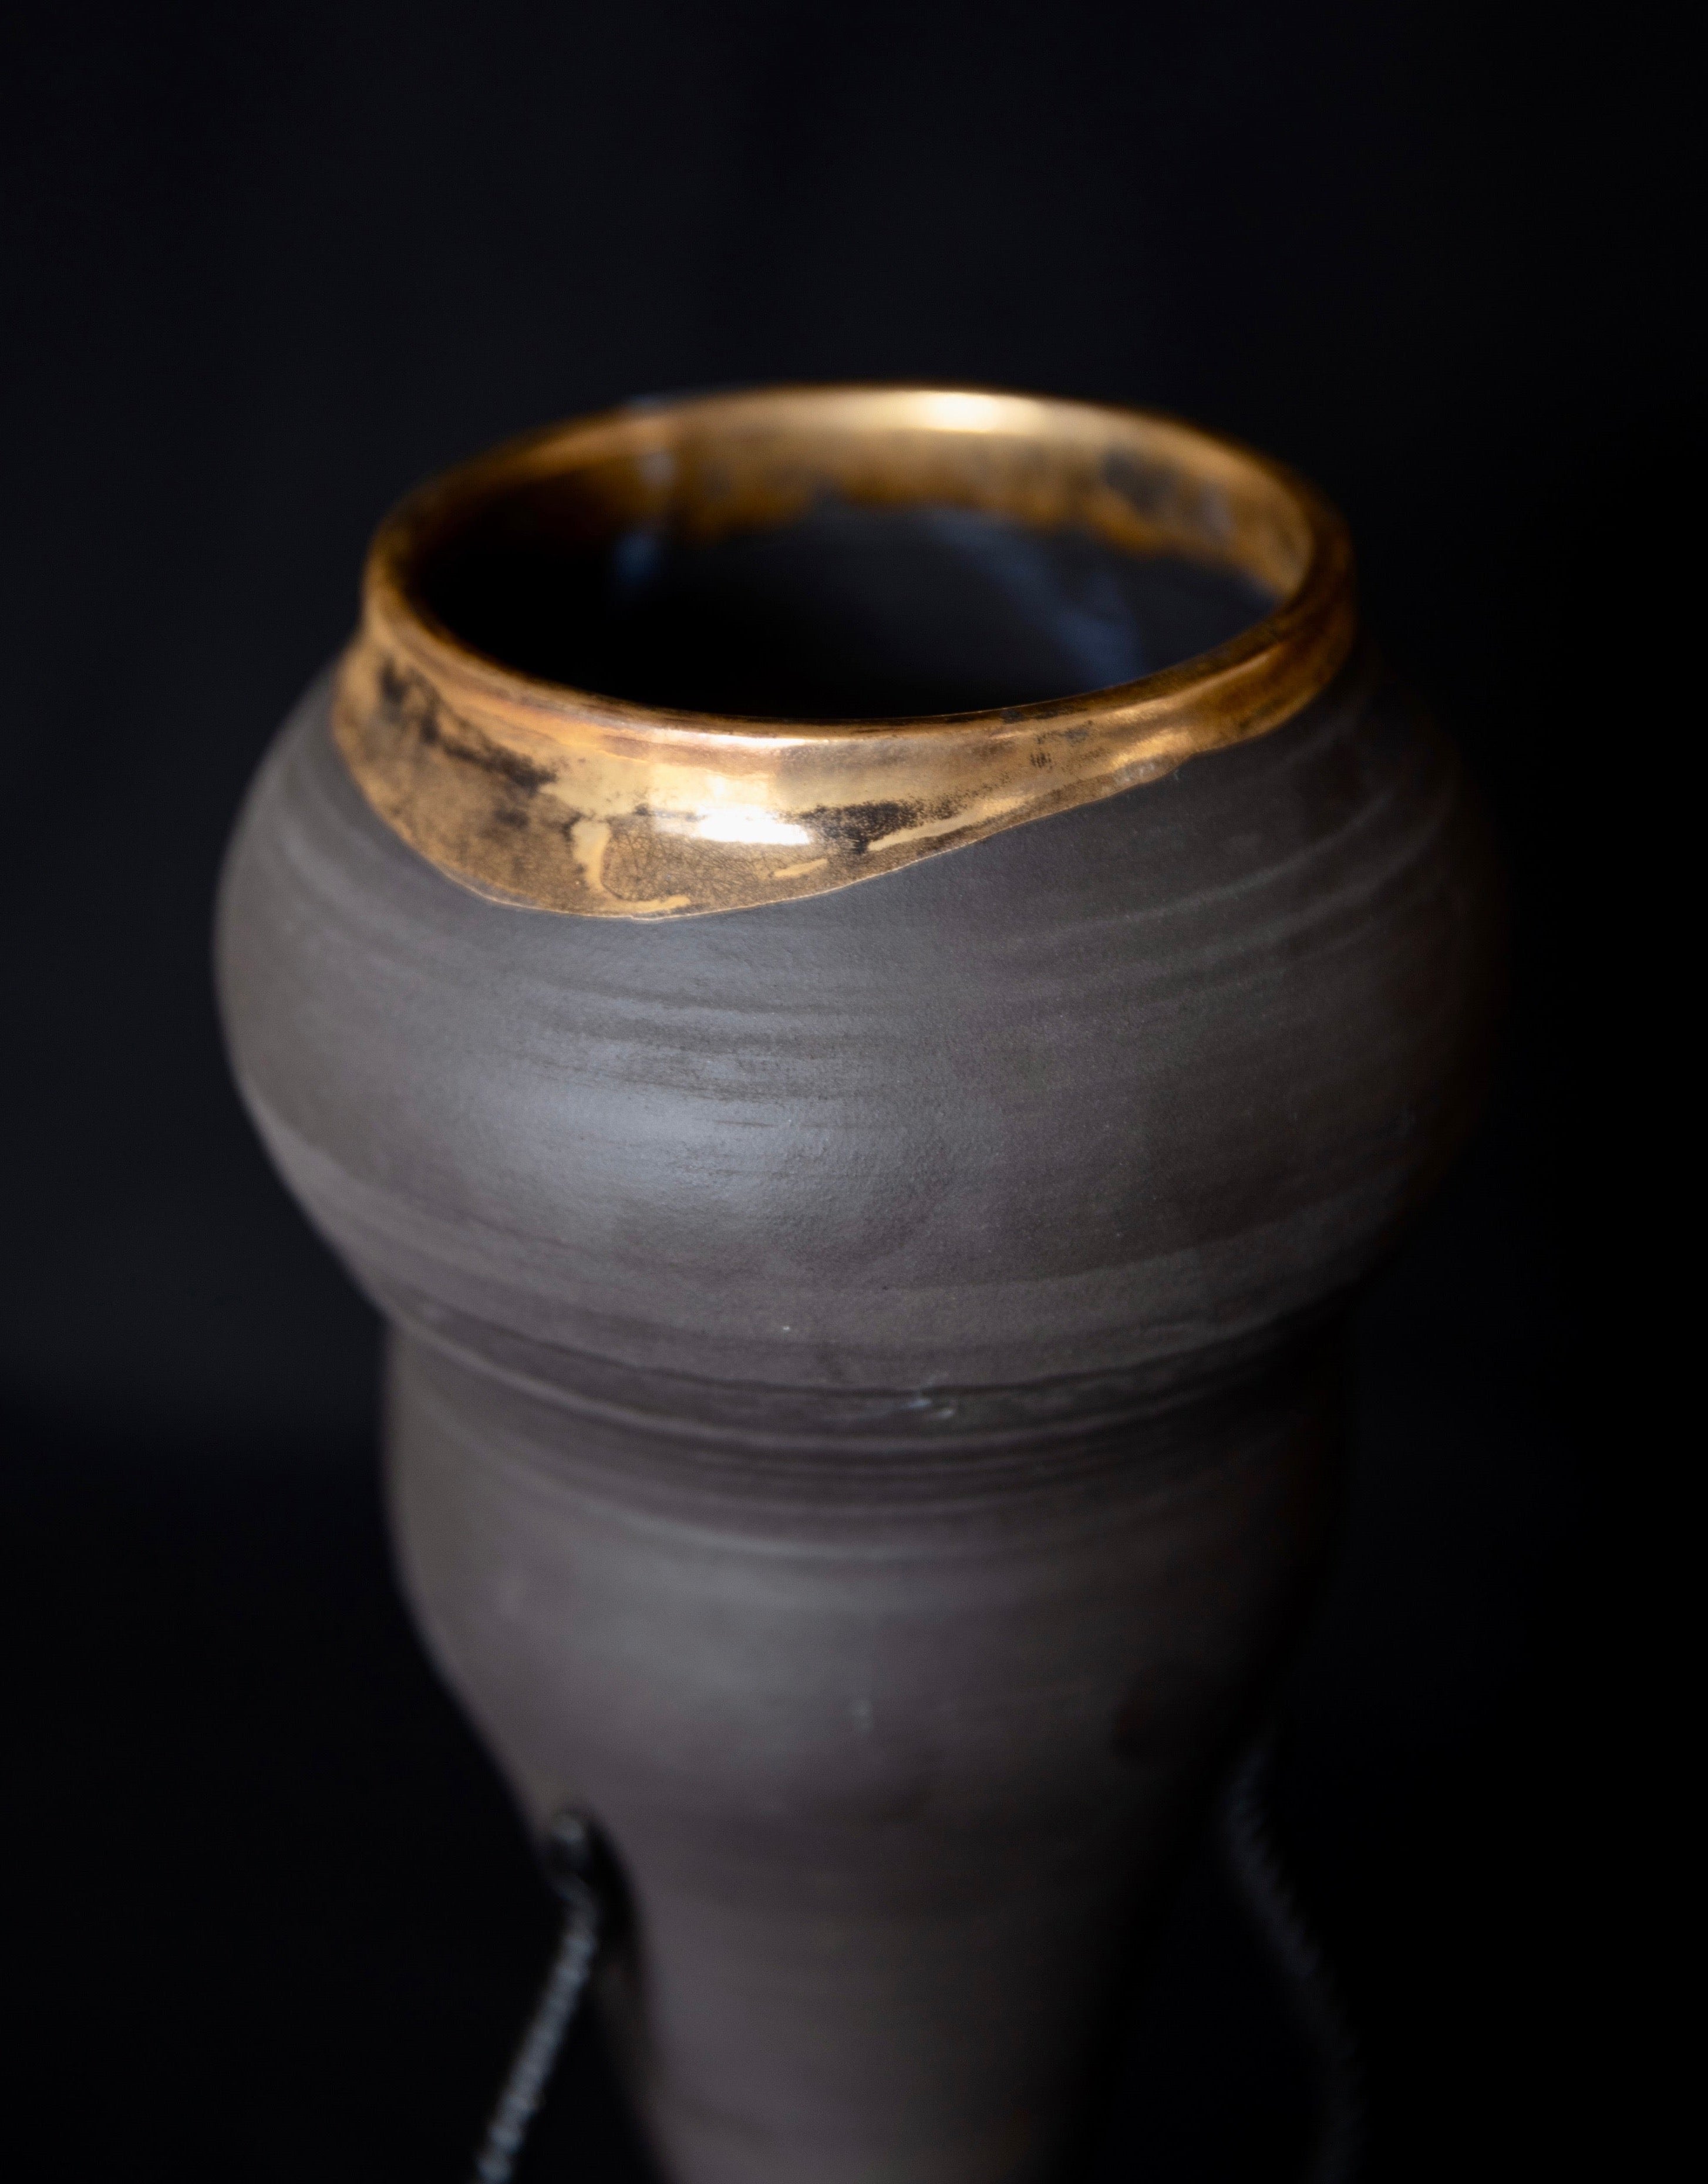 Ceramic Amphora Handcrafted by Naiimpottery | Black Amphora Pointed Vase in a Unique Metal Stand | Handcrafted Amphora Gold Coated